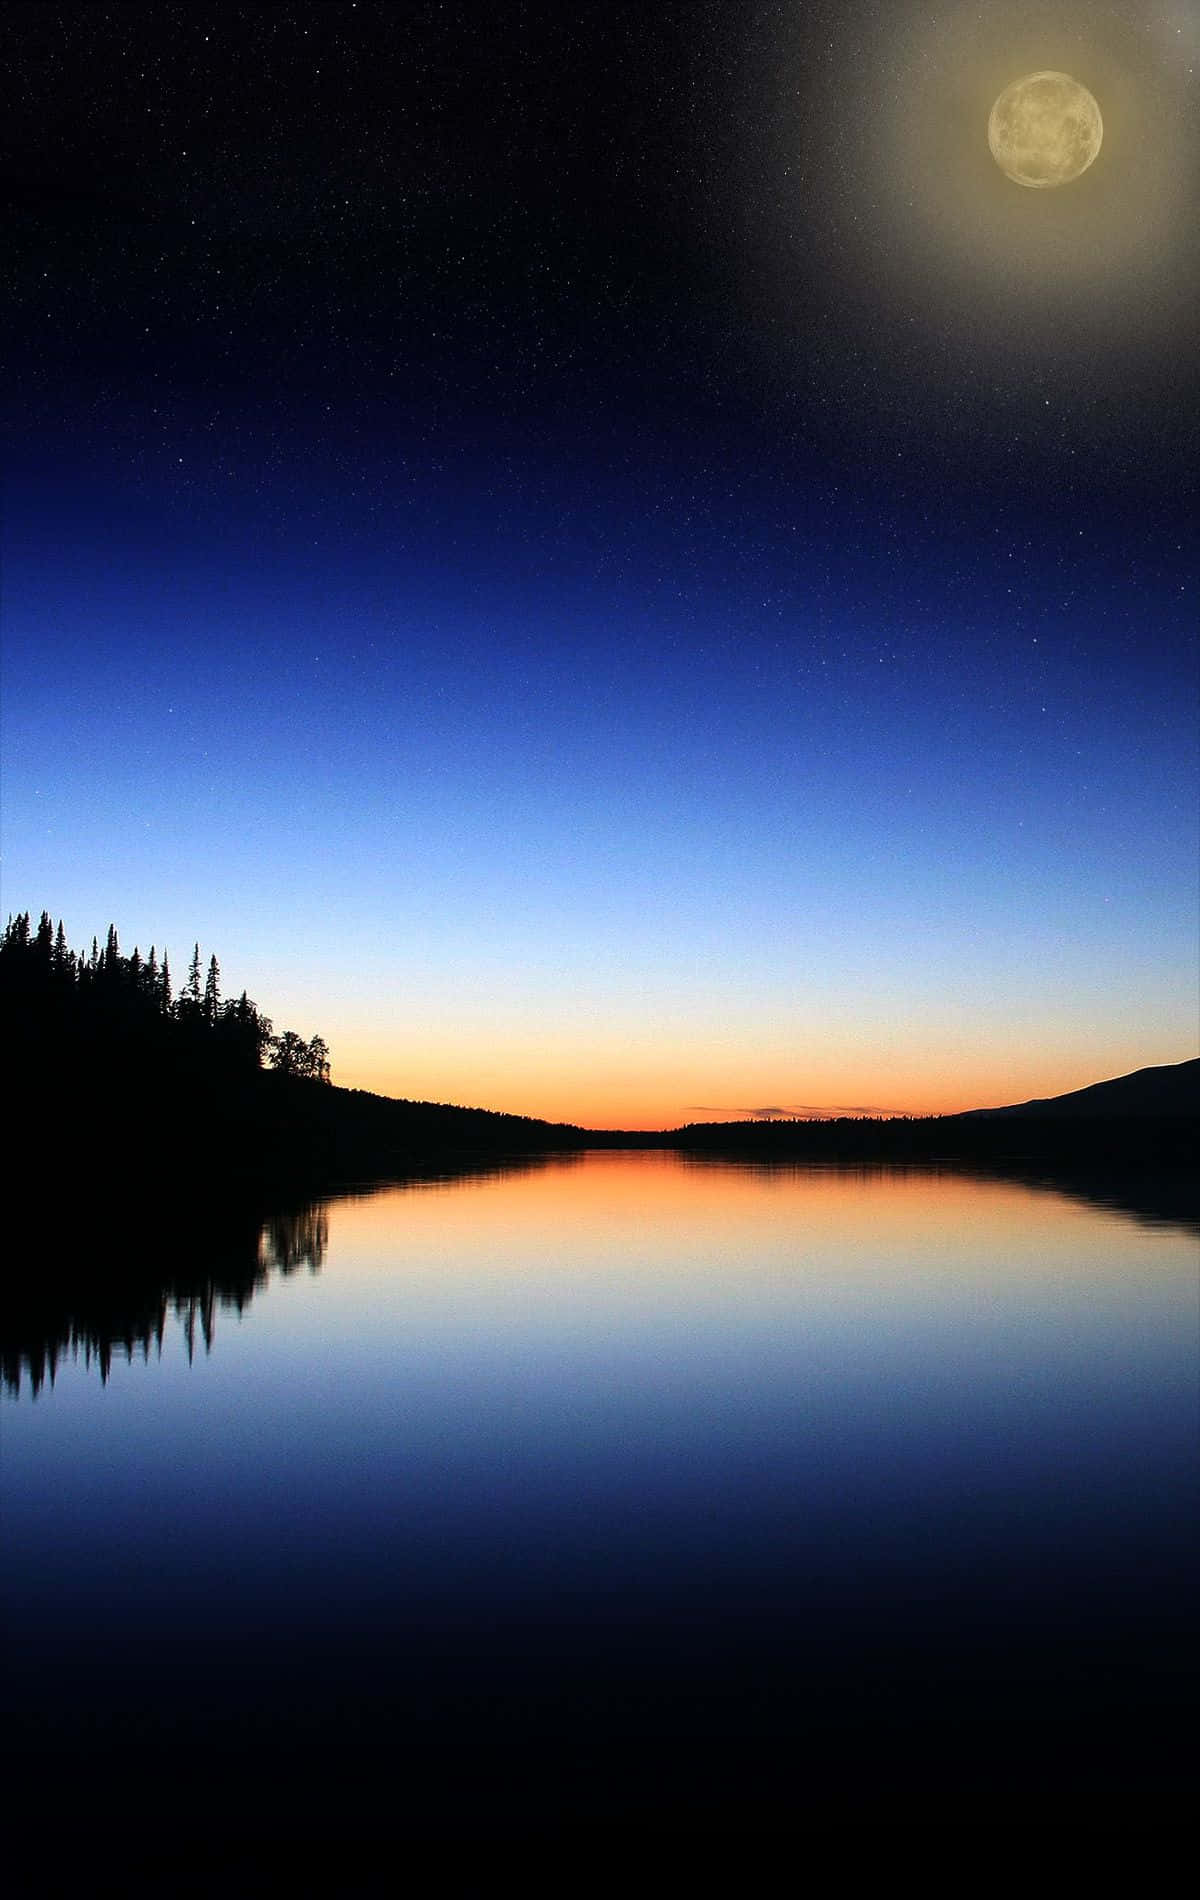 A Moon Is Reflected In A Lake At Night Wallpaper